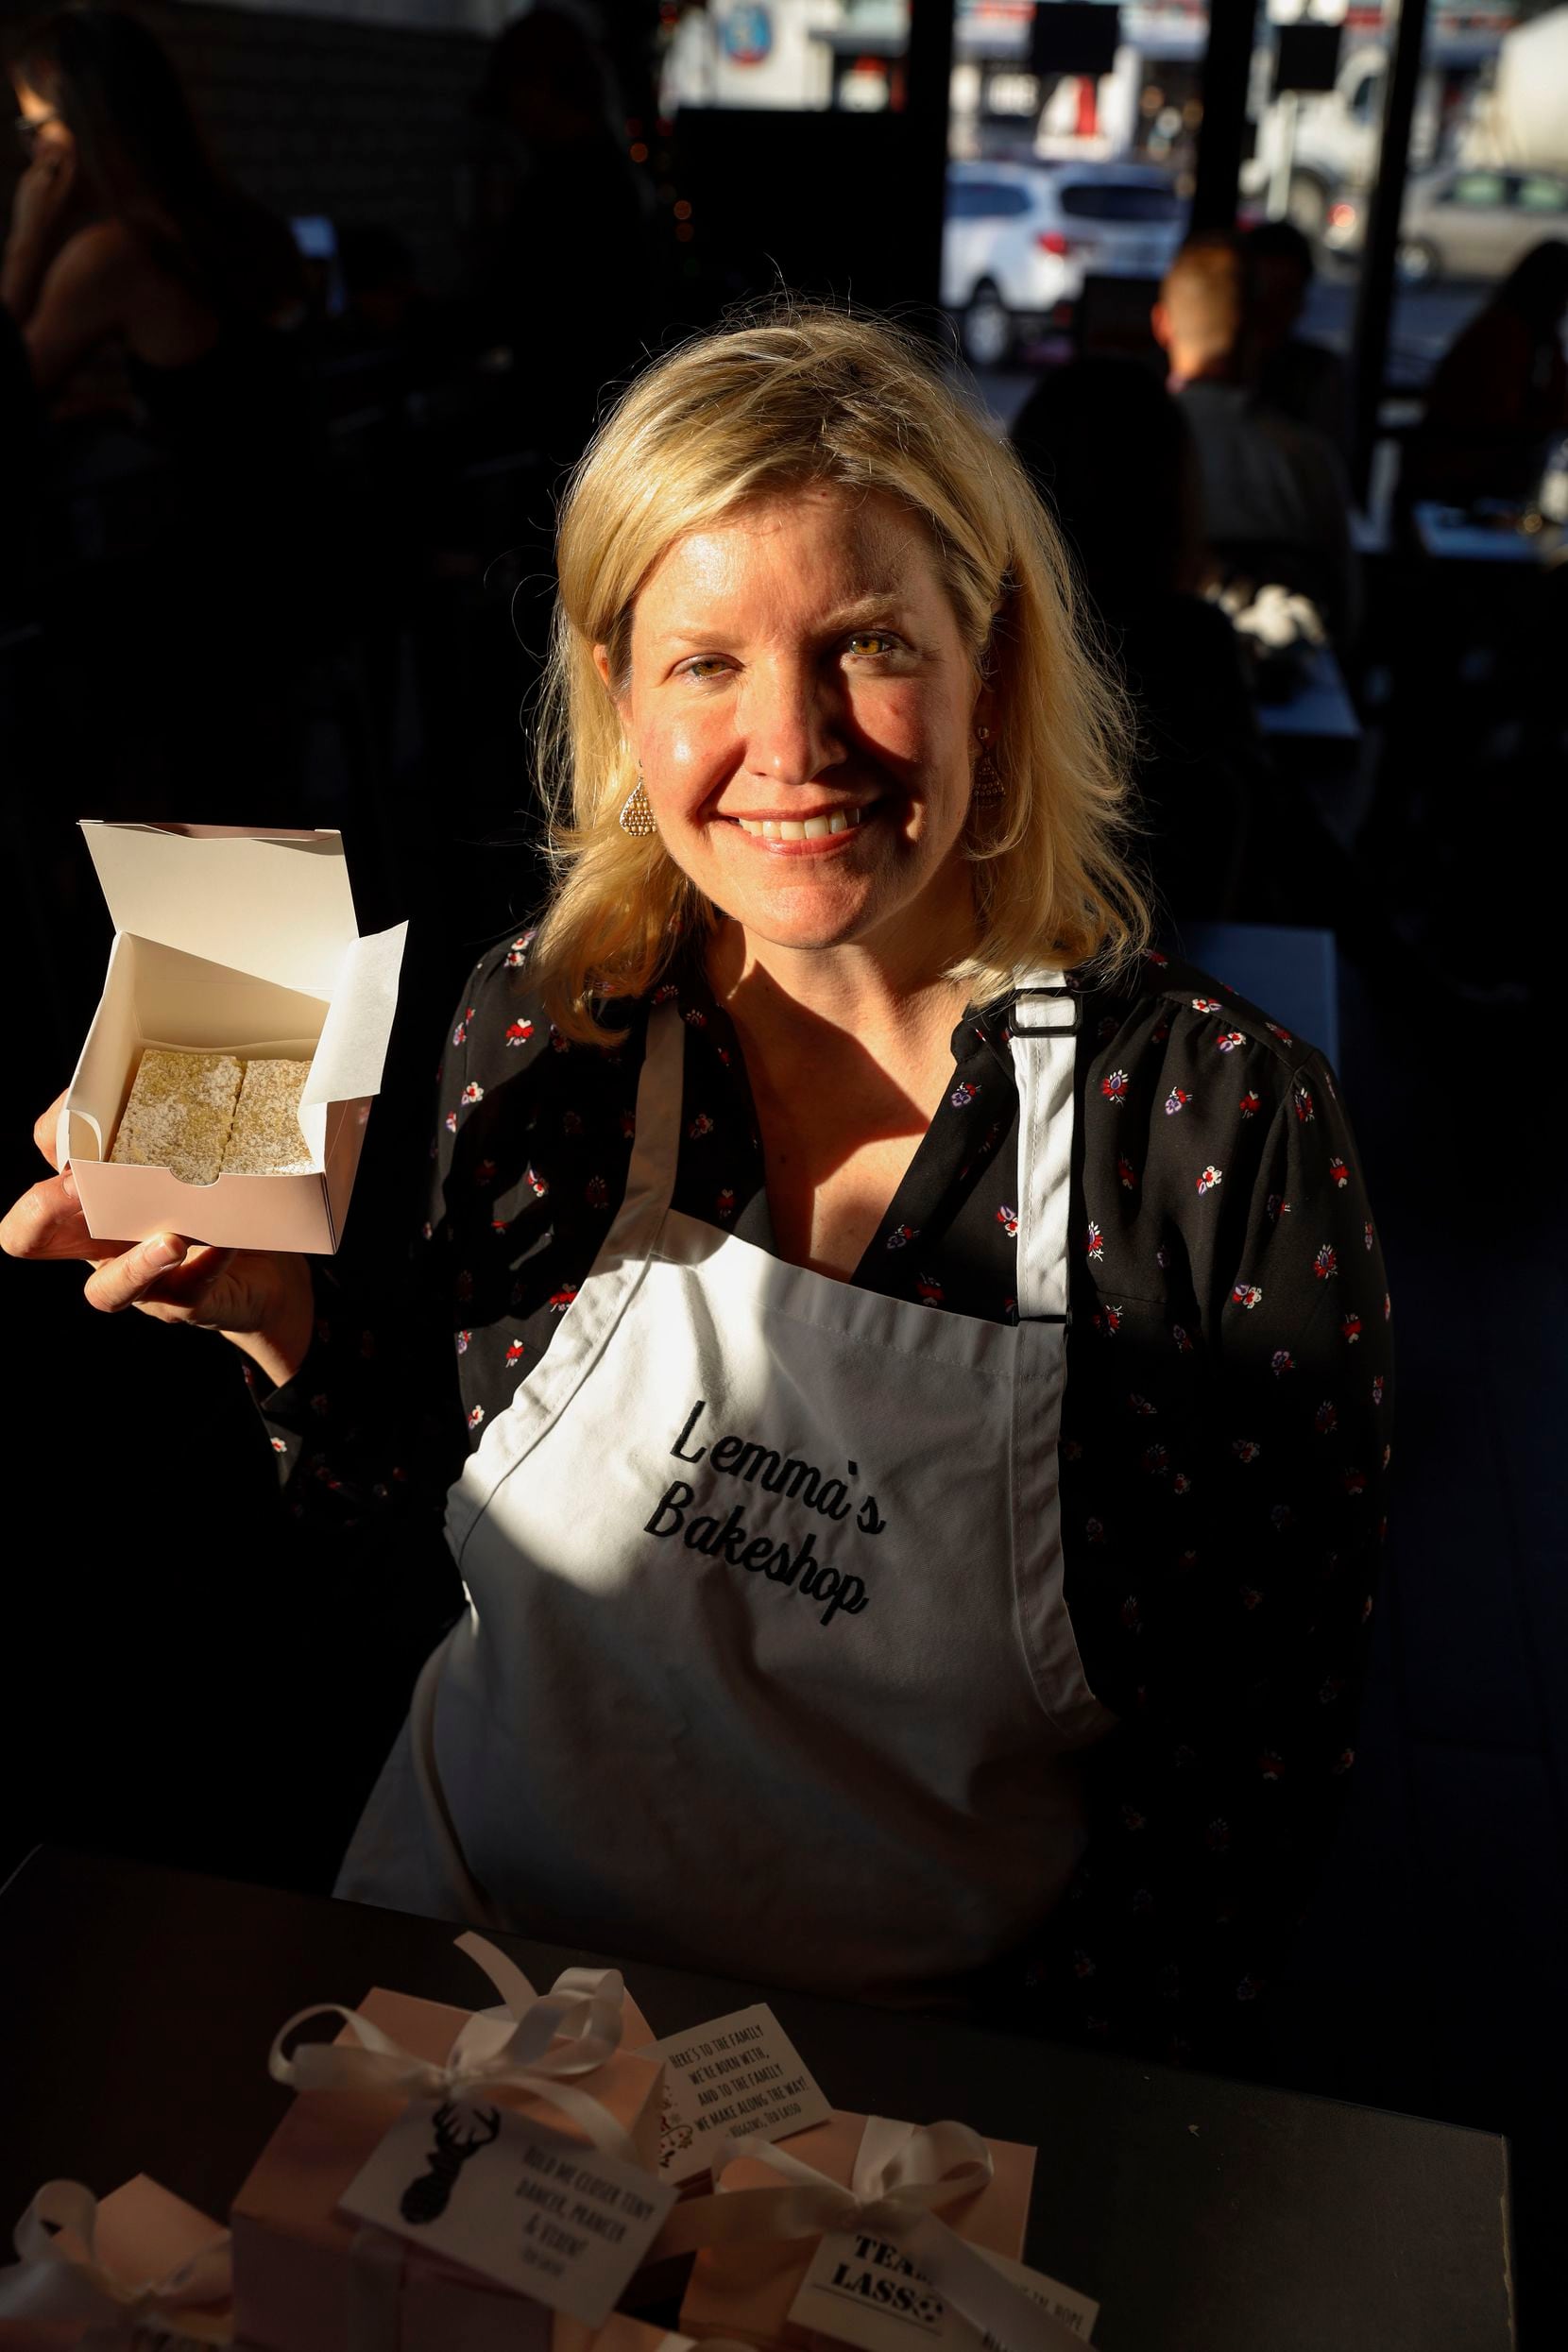 Cathy McEachern poses with some of her pink boxes containing her version of Ted Lasso's biscuits — hot sellers to fans of Apple TV's hit series. Some customers meet her at  White Rock Coffee on Royal Lane to pick up their orders. She's looking for space to open her own bakery next year.